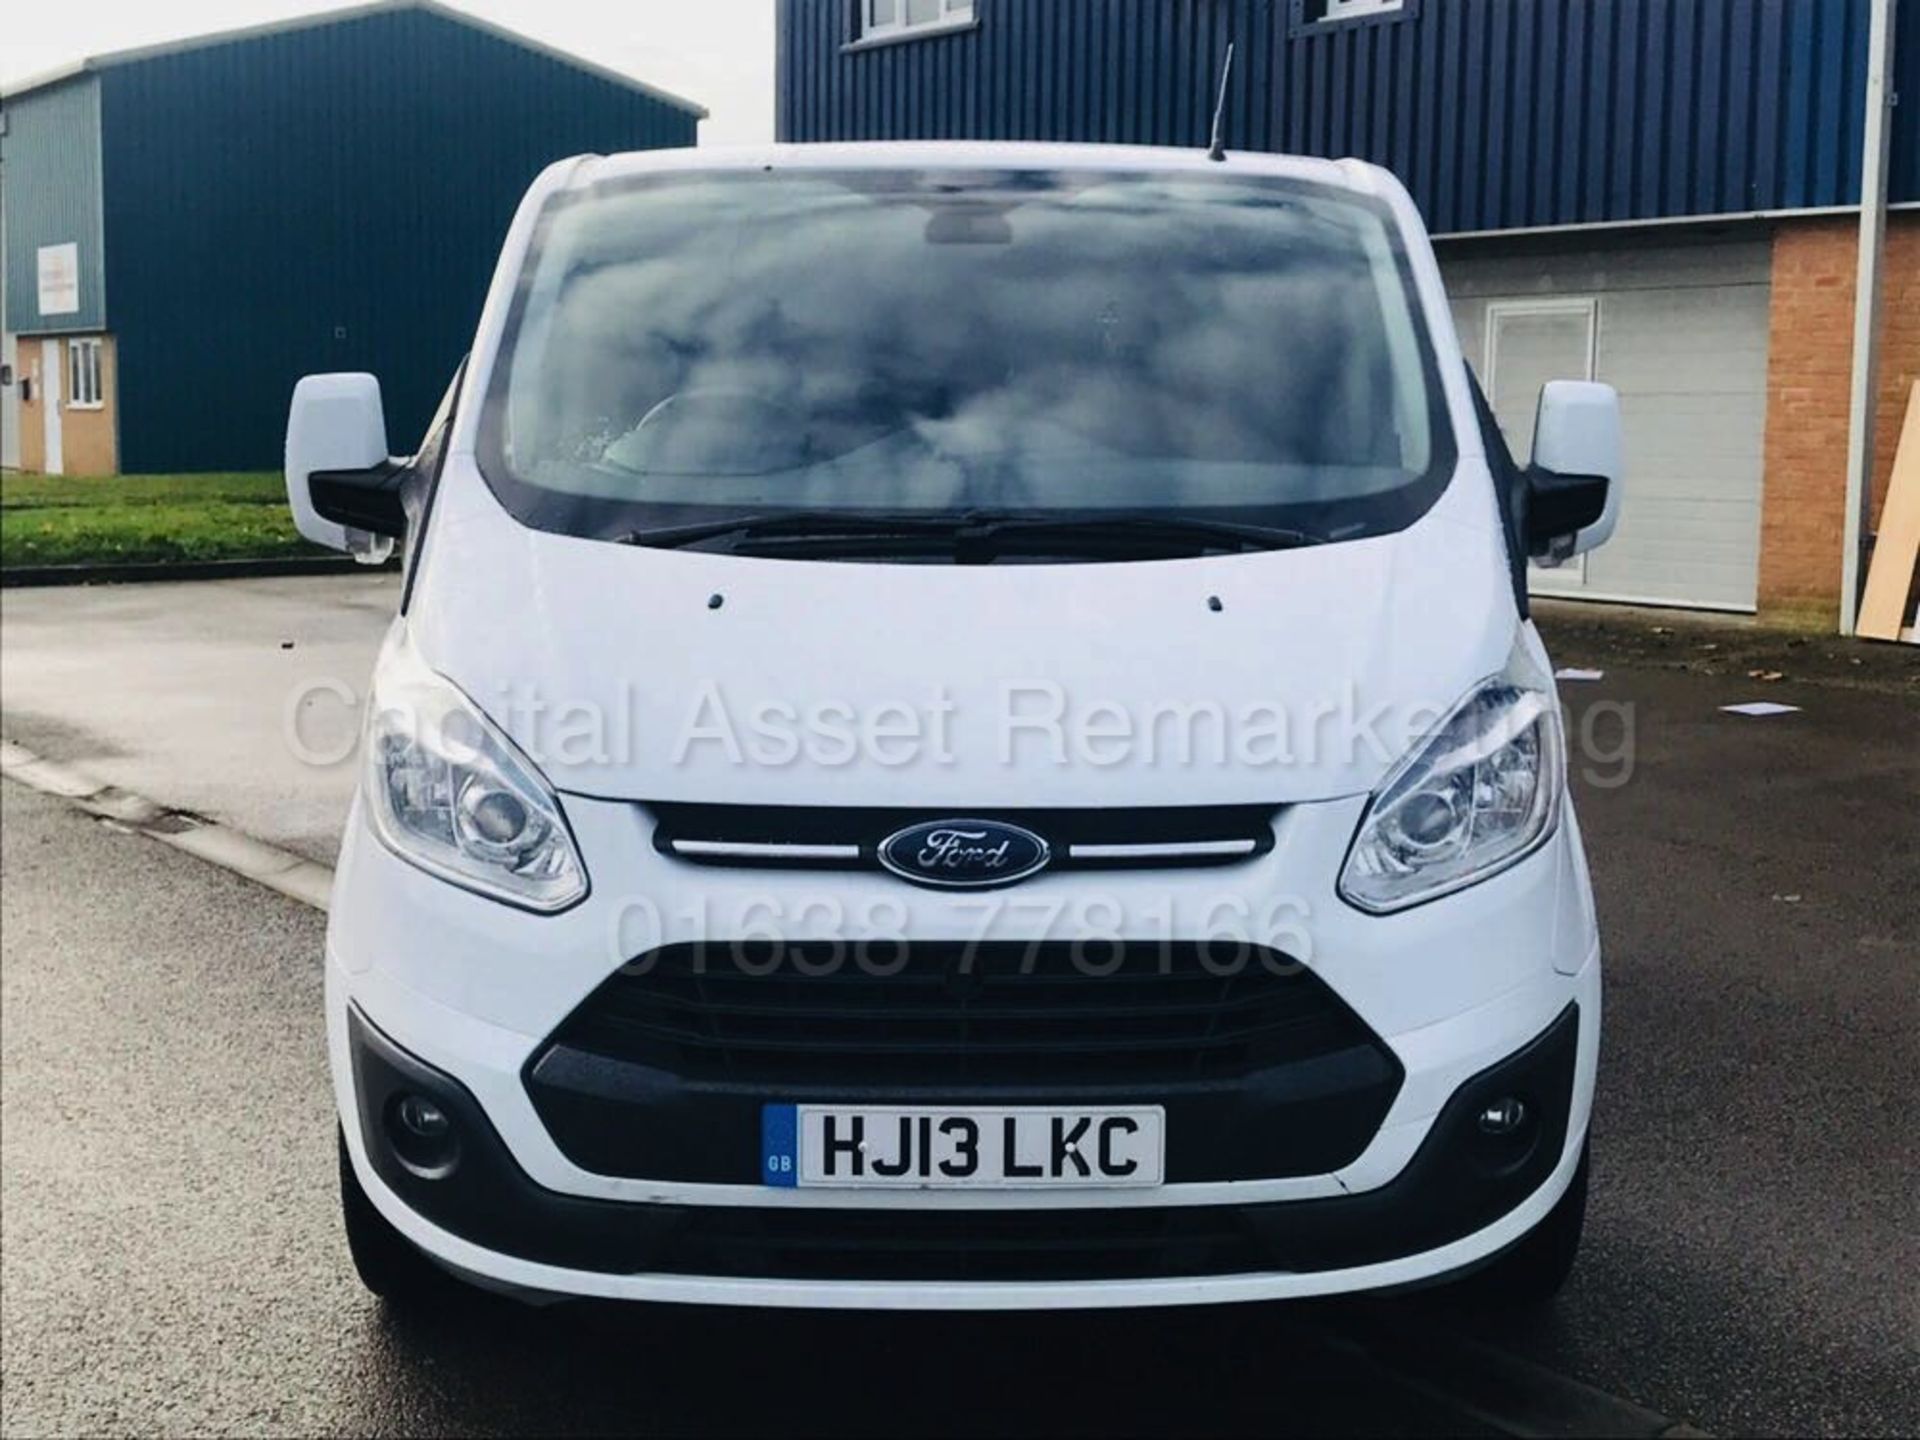 (On Sale) FORD TRANSIT CUSTOM 'LIMITED SPEC' (2013 - NEW MODEL) '2.2 TDCI - 6 SPEED' *A/C* (NO VAT) - Image 2 of 32